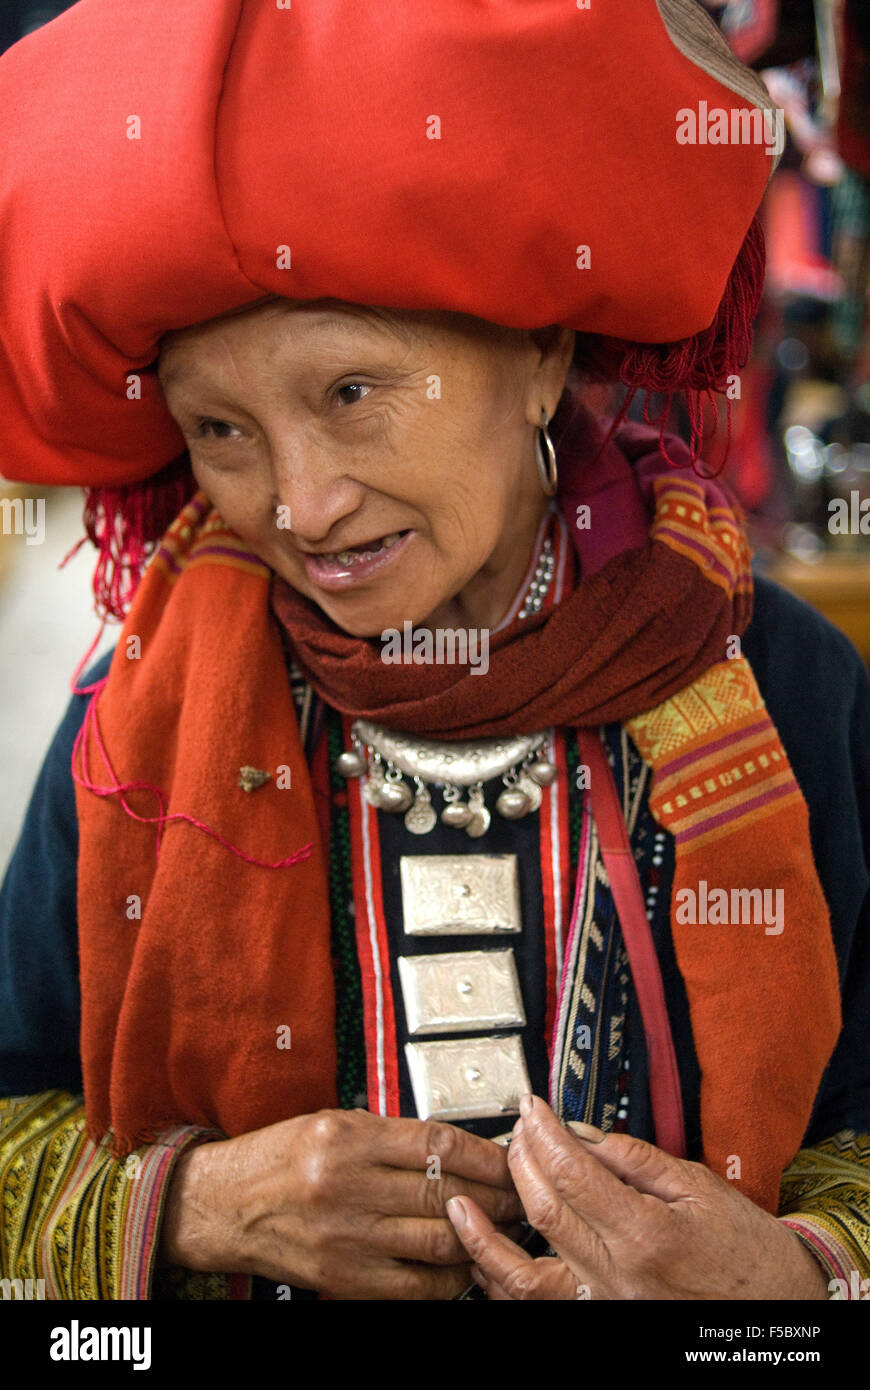 Woman from the Red Dzao ethnic minority group, a mountain tribe, at the market of Sapa or Sa Pa, northern Vietnam, Vietnam, Asia Stock Photo